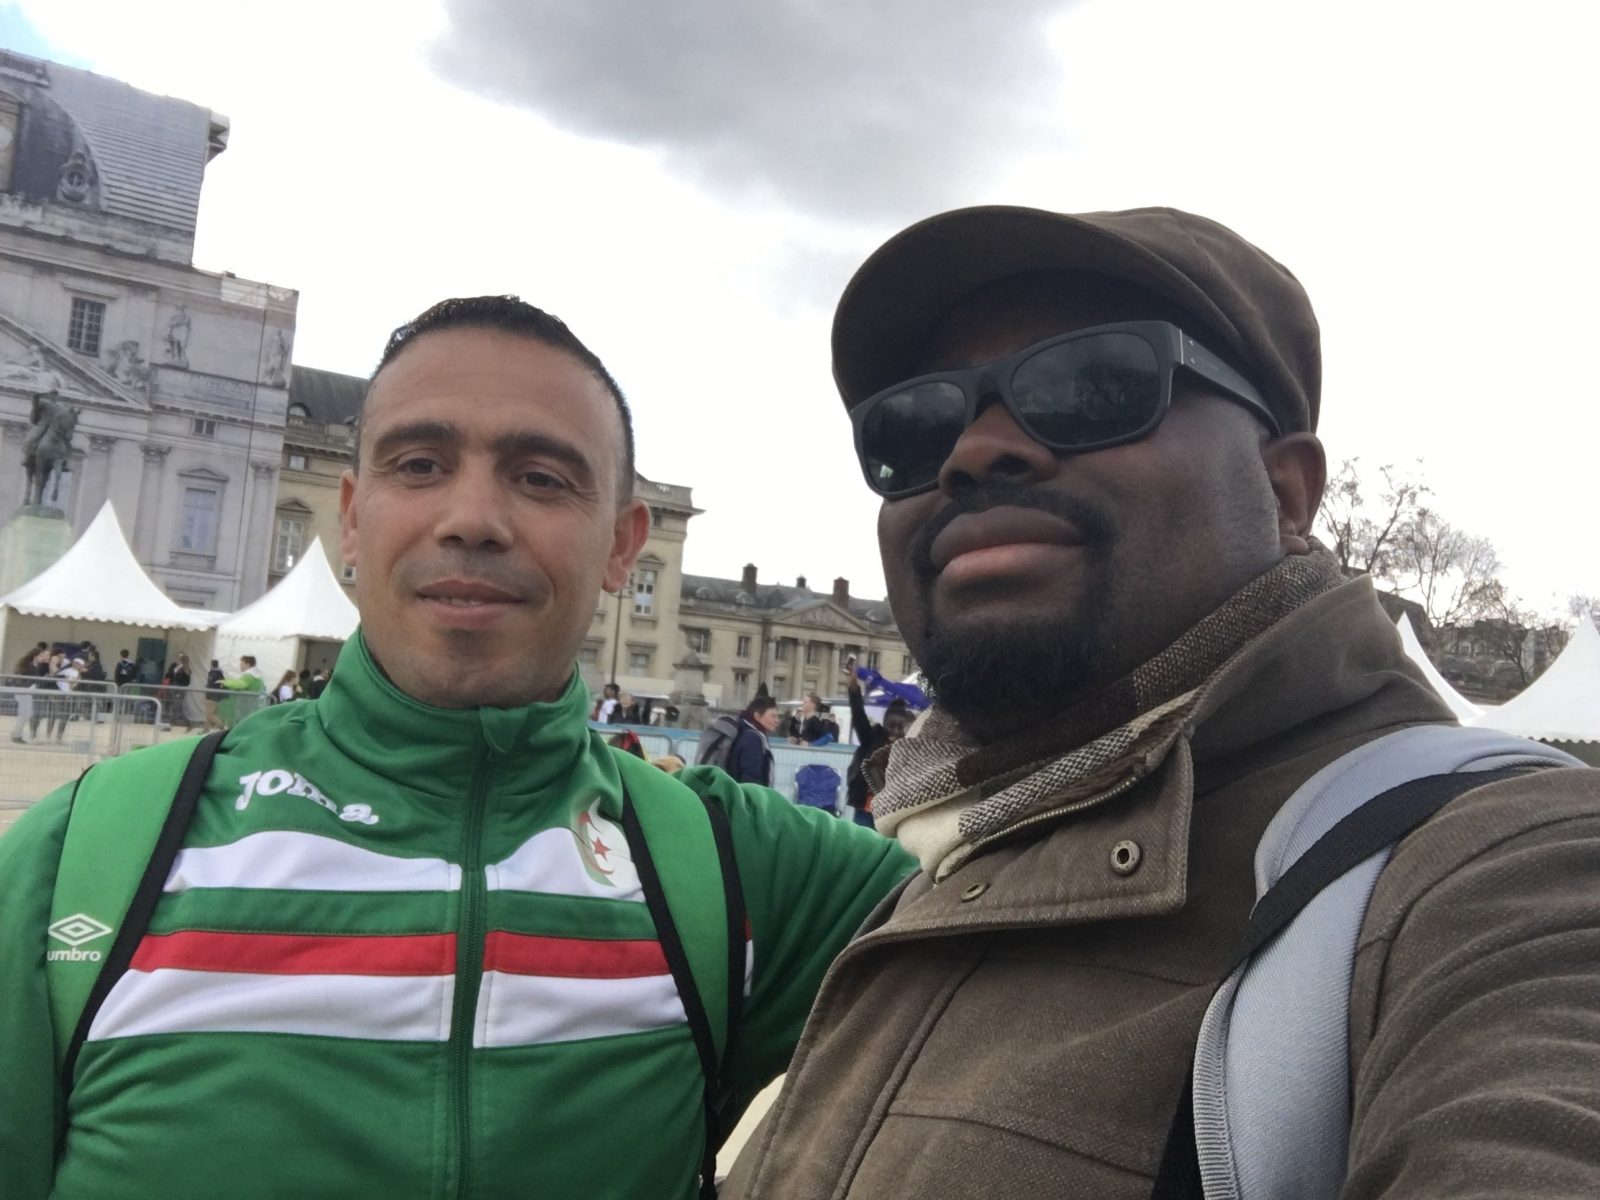 Our Editor caught up with the Algerian team coach at the 2018 ISF World School Championships in Paris